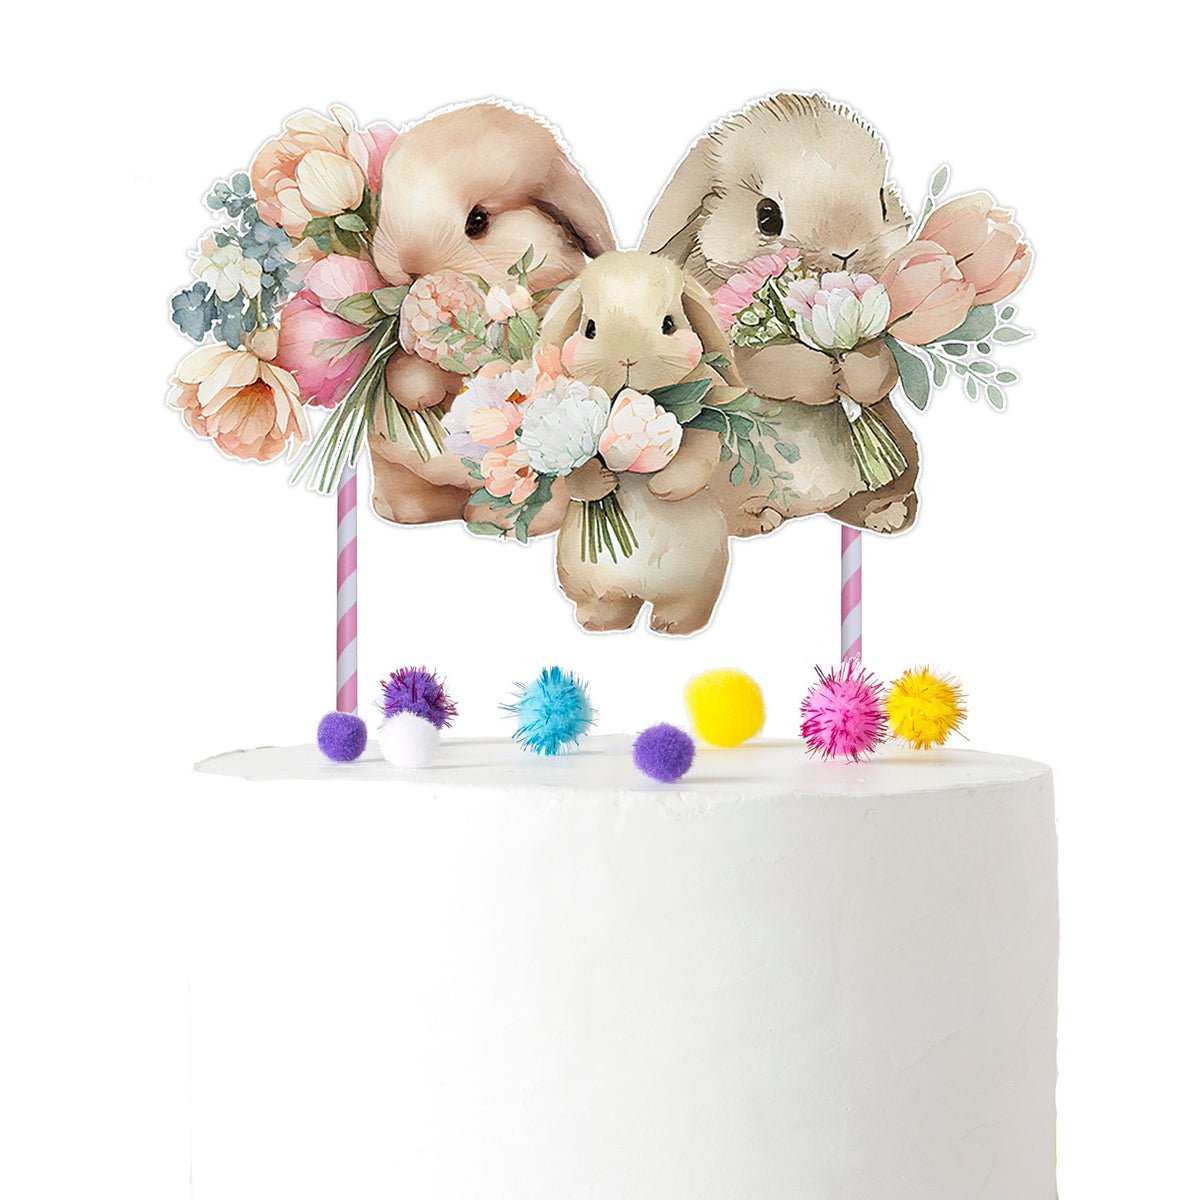 Adorable Little Bunny Cake Topper – Ideal for Baby Showers and Birthday Celebrations